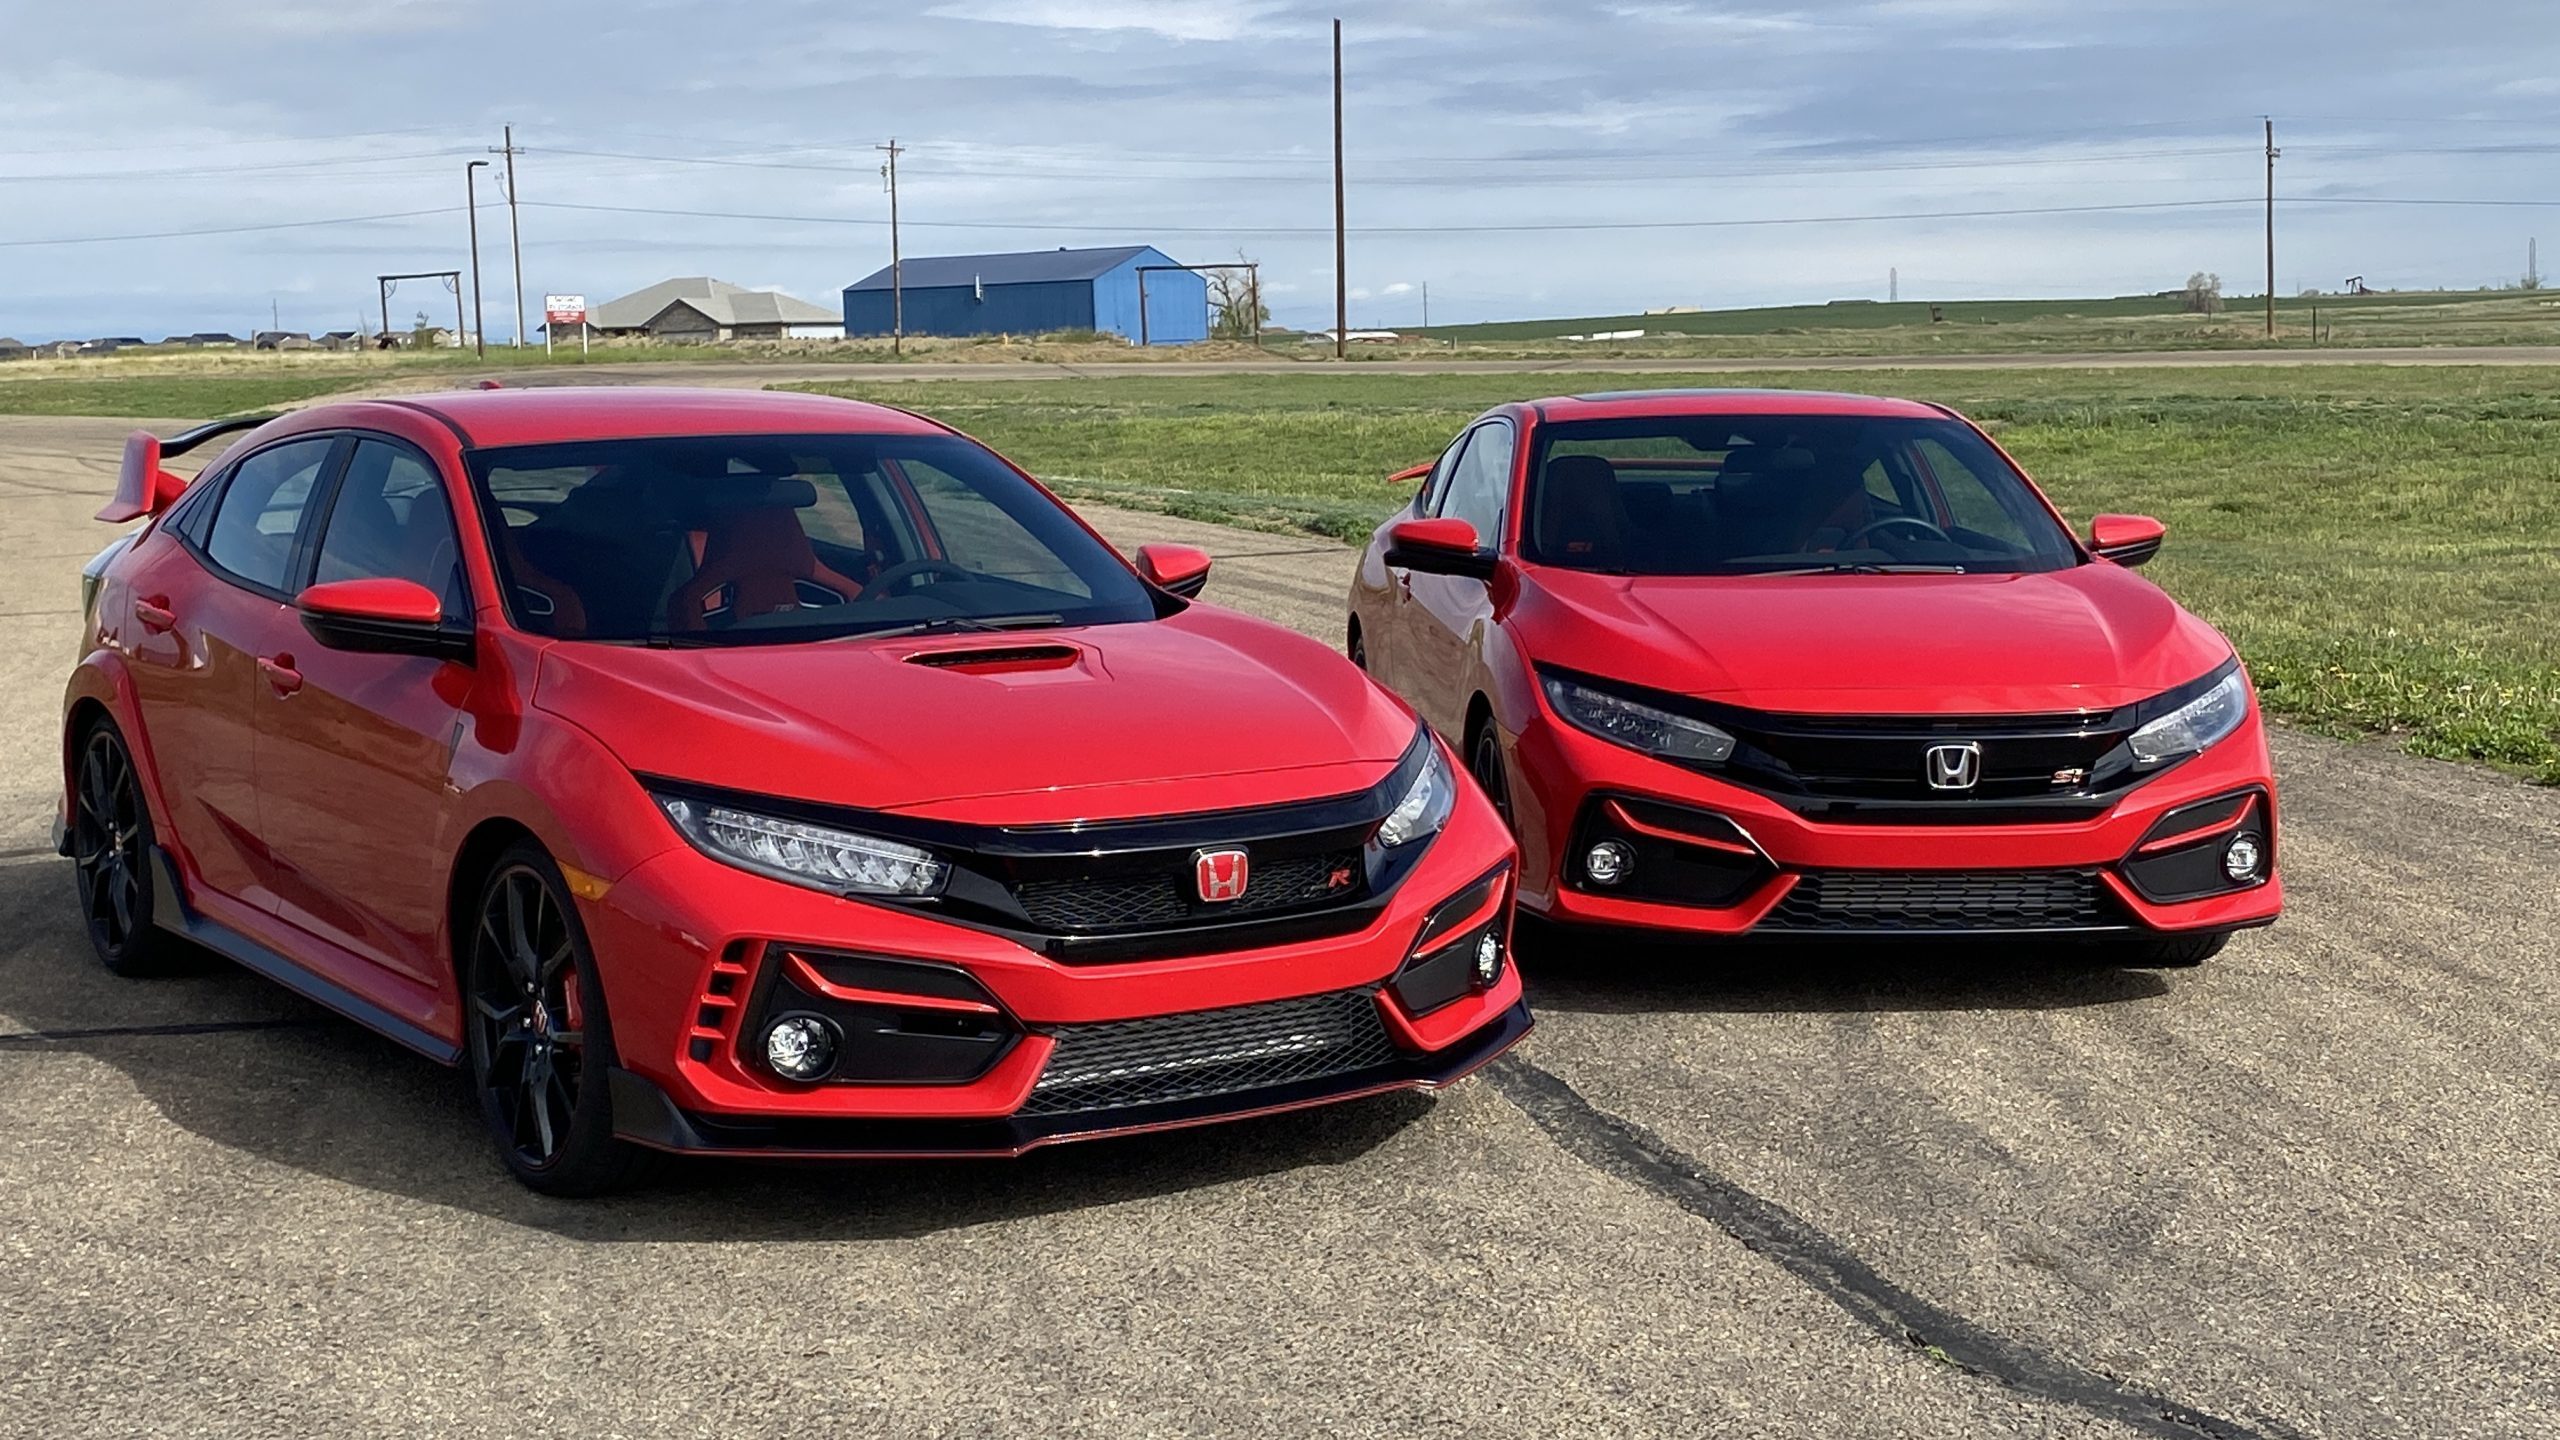 honda pauses the civic si drops the civic coupe and the fit hatchback for 2021 the fast lane car civic si drops the civic coupe